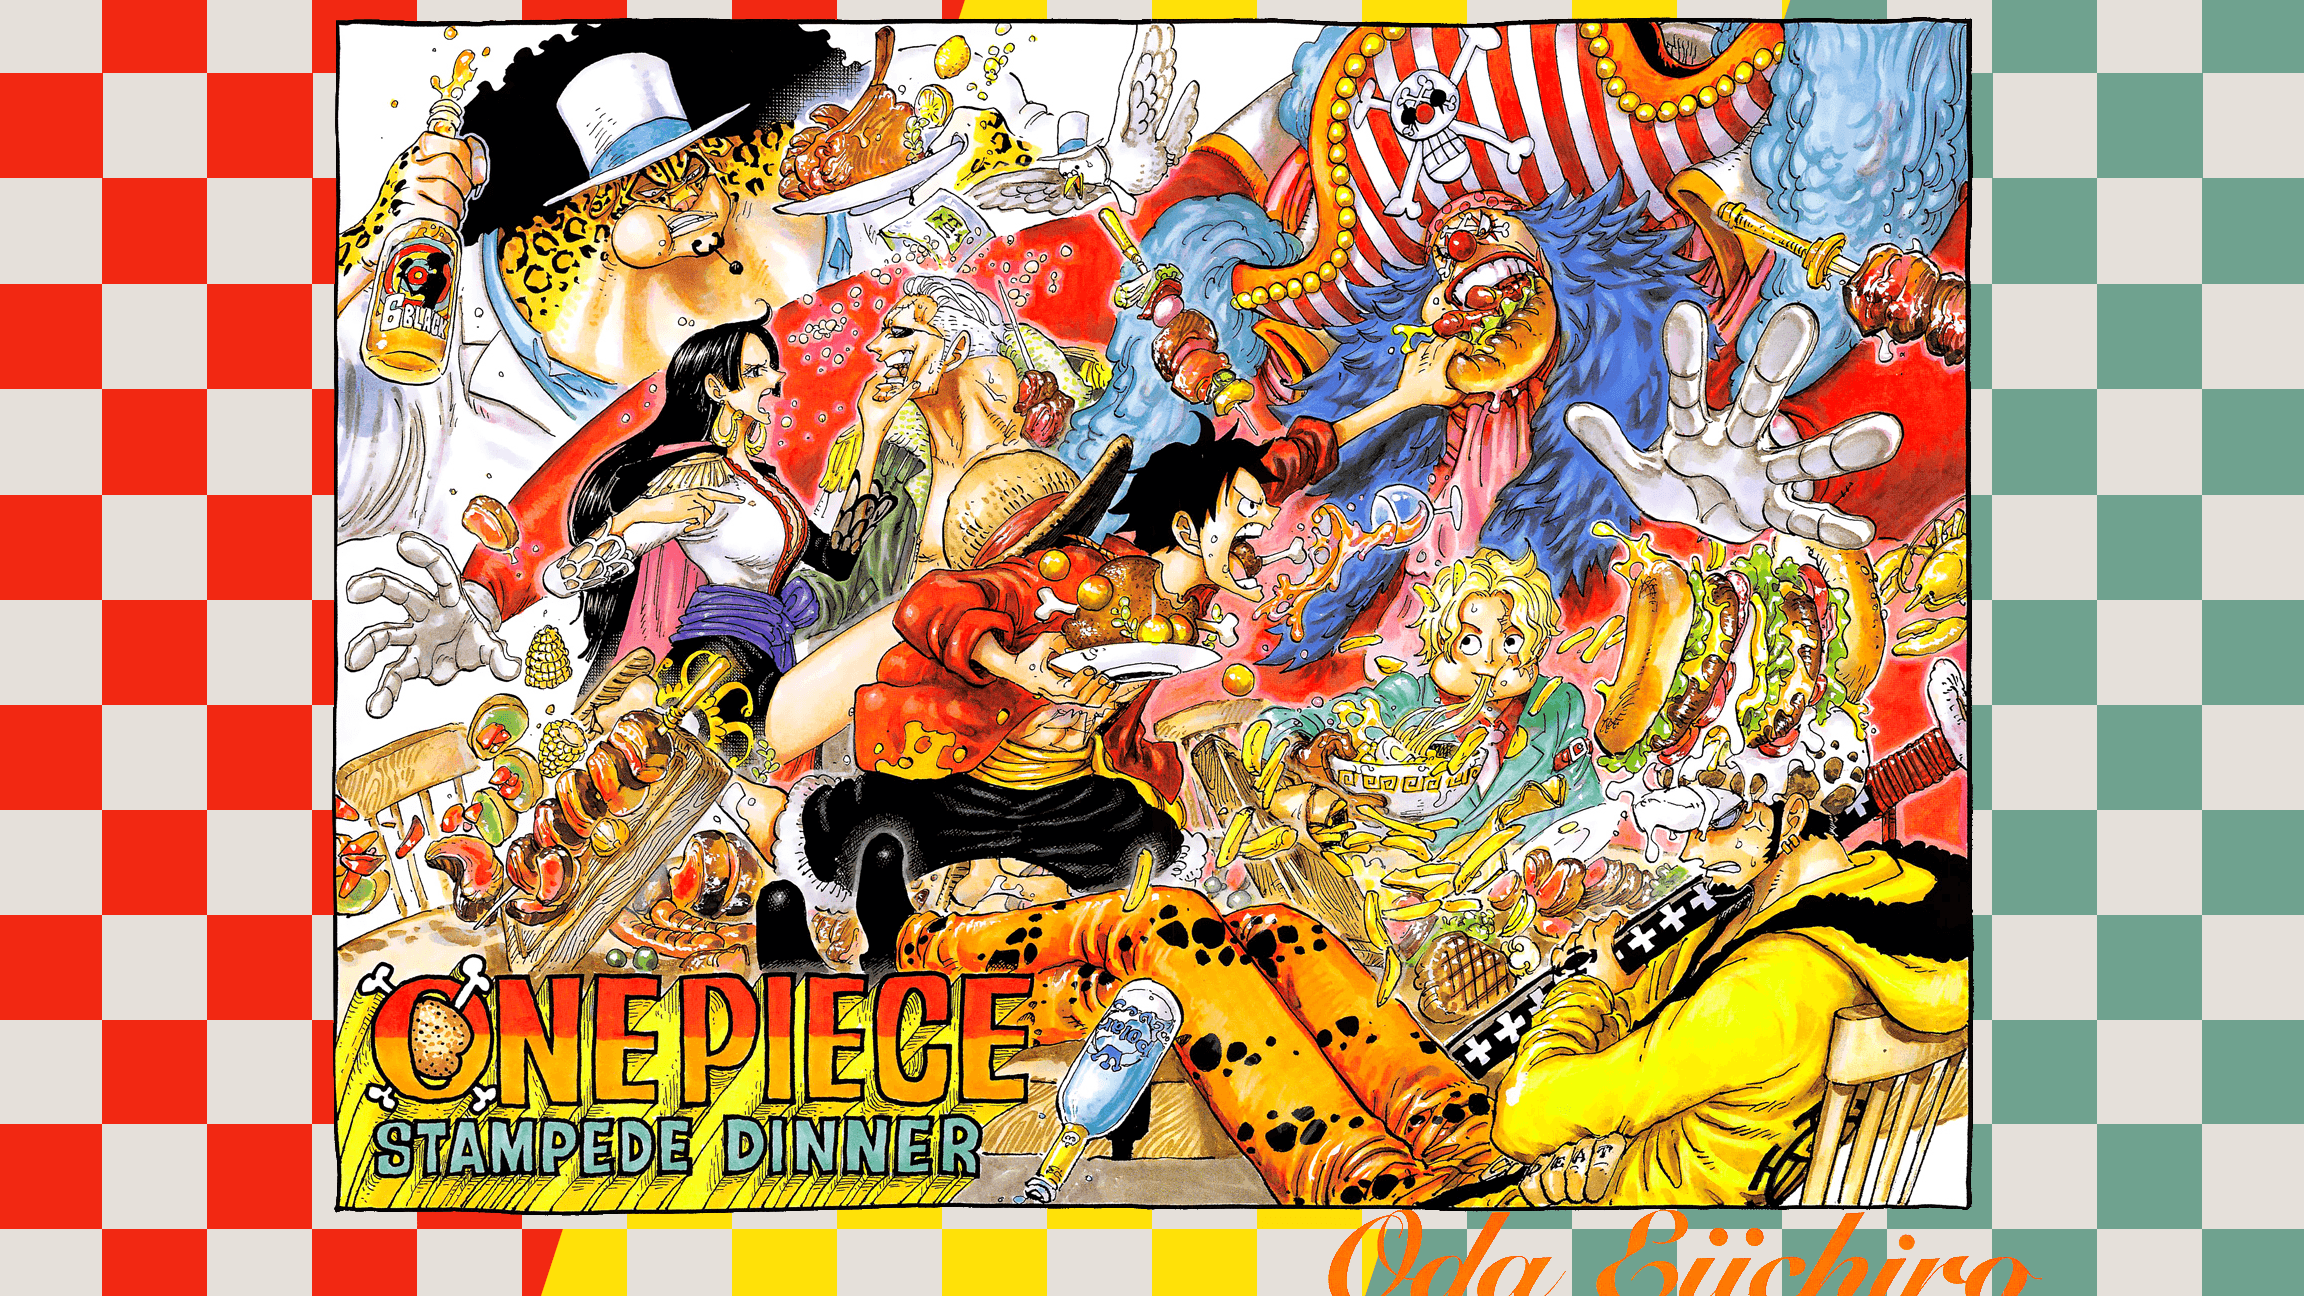 The newest Colour Spread promoting Stampede as a 16:9